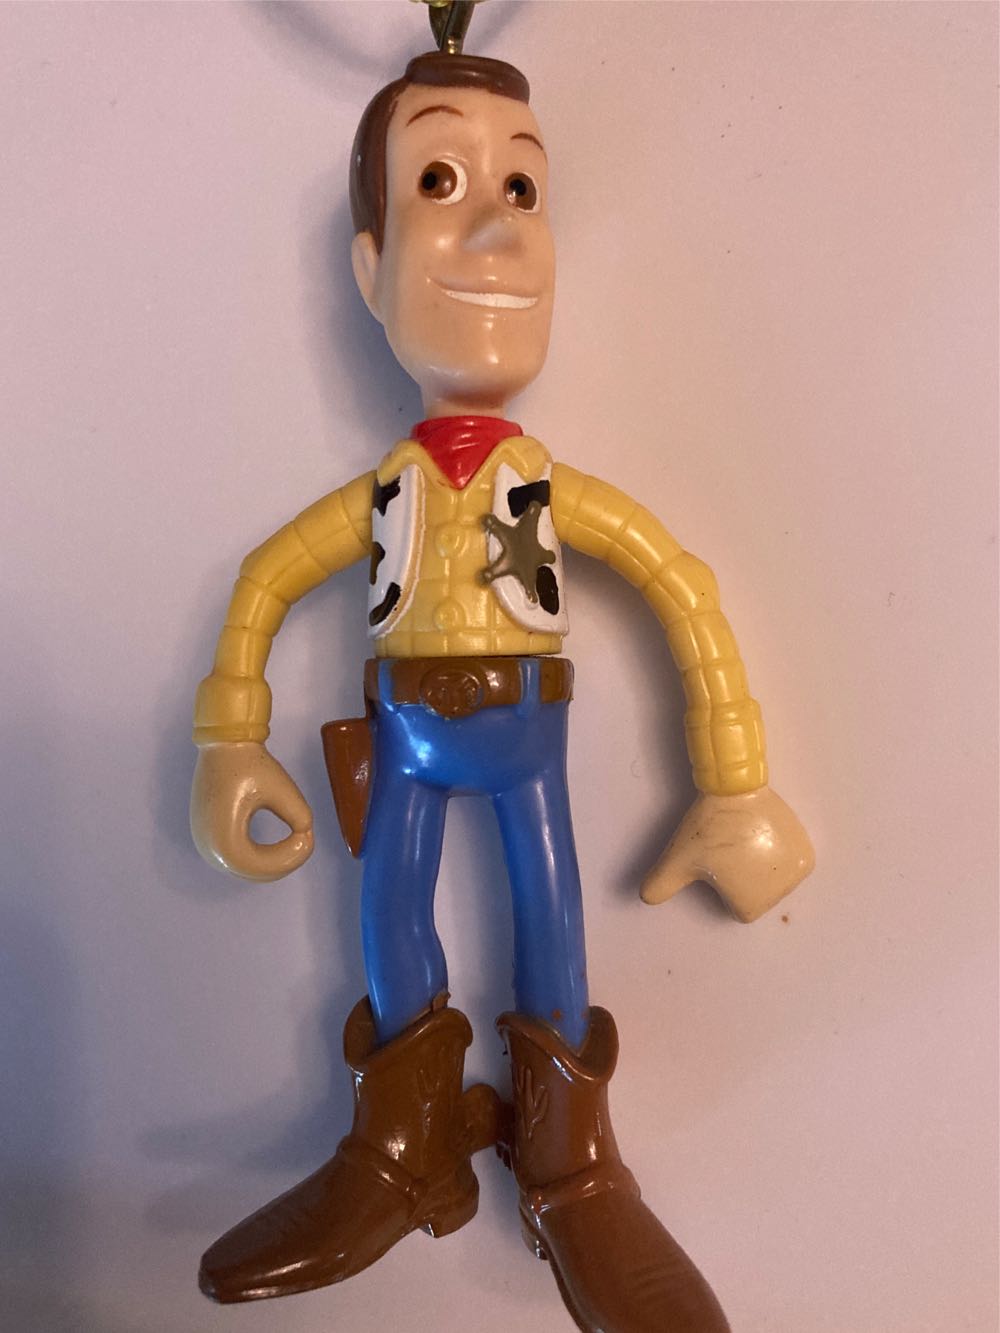 Woody - Toy Story - Disney - Pixar Toy Story (Disney) ornament collectible - Main Image 1